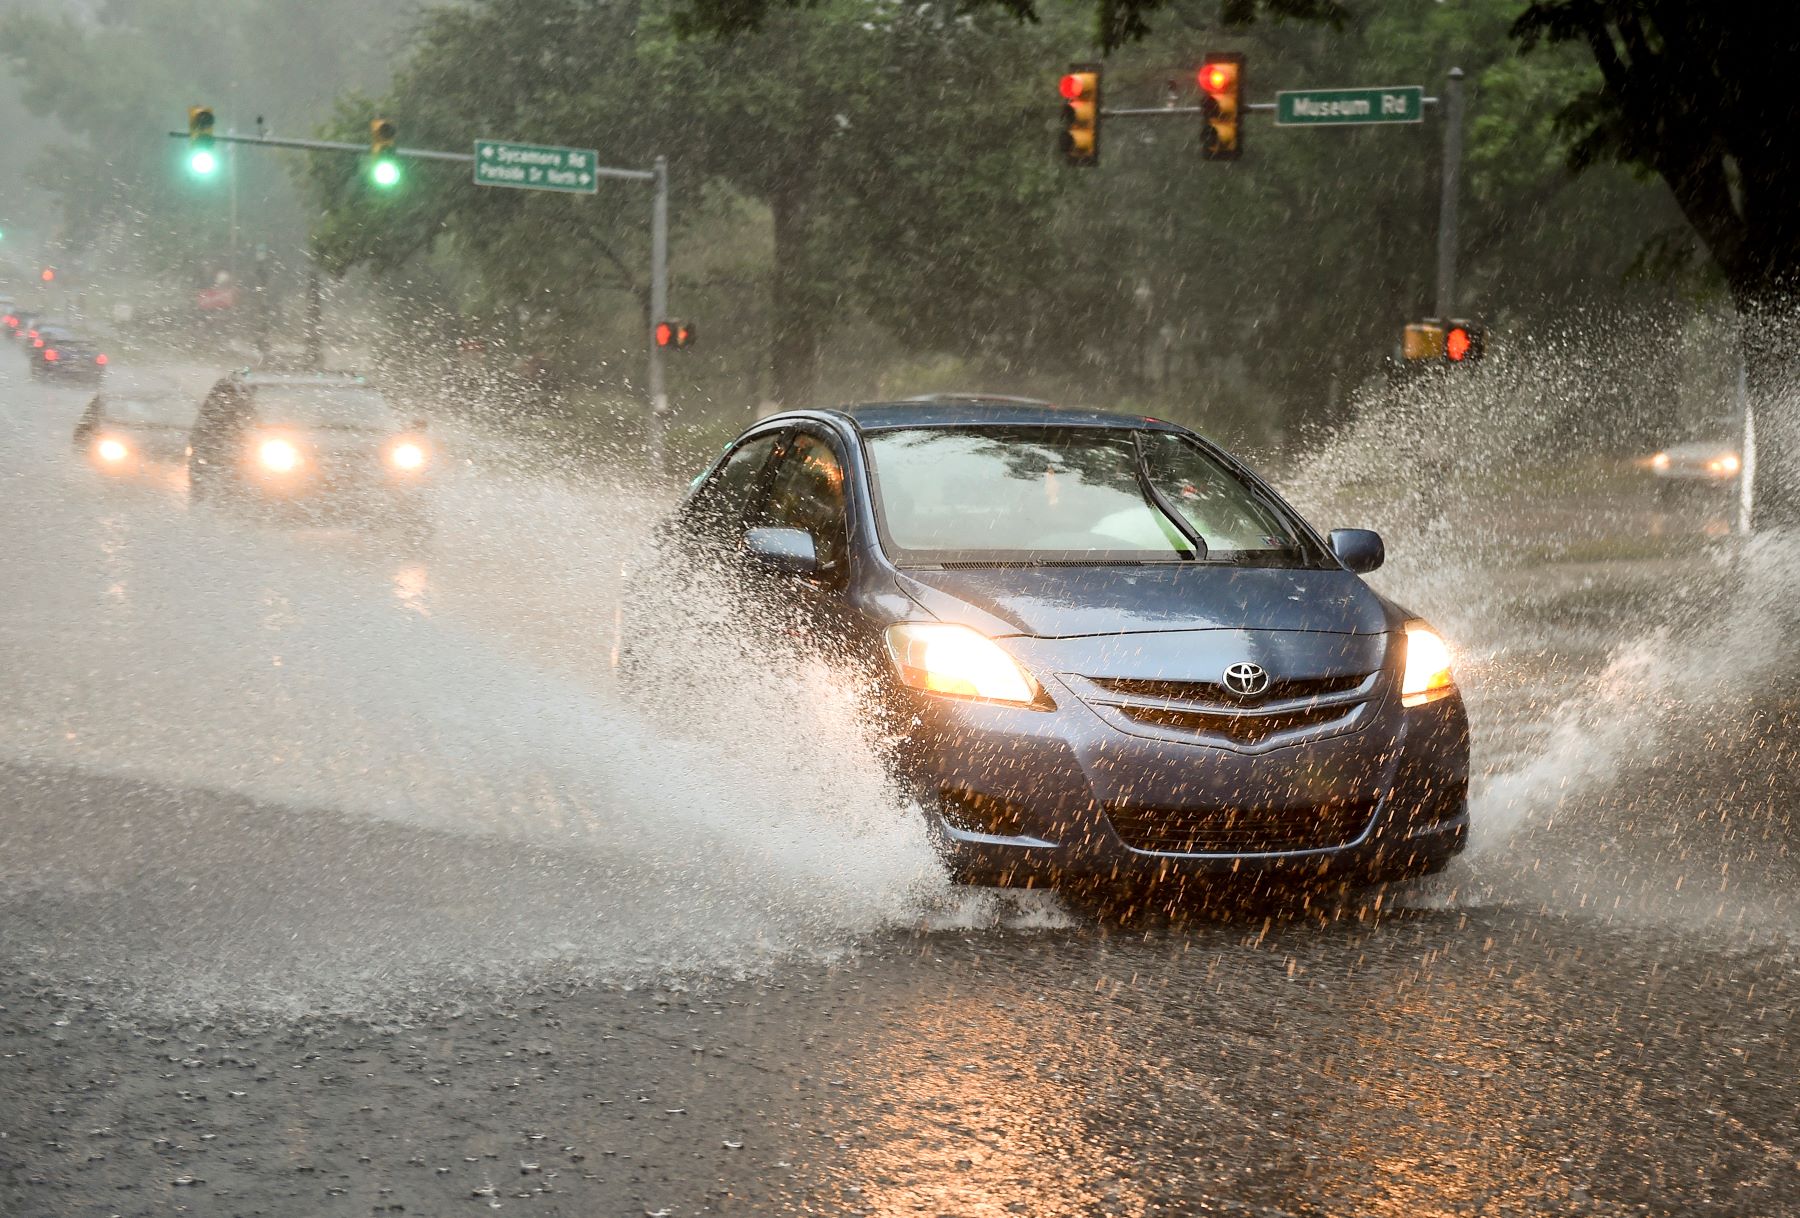 A blue Toyota car driving through rain puddles with its headlights on